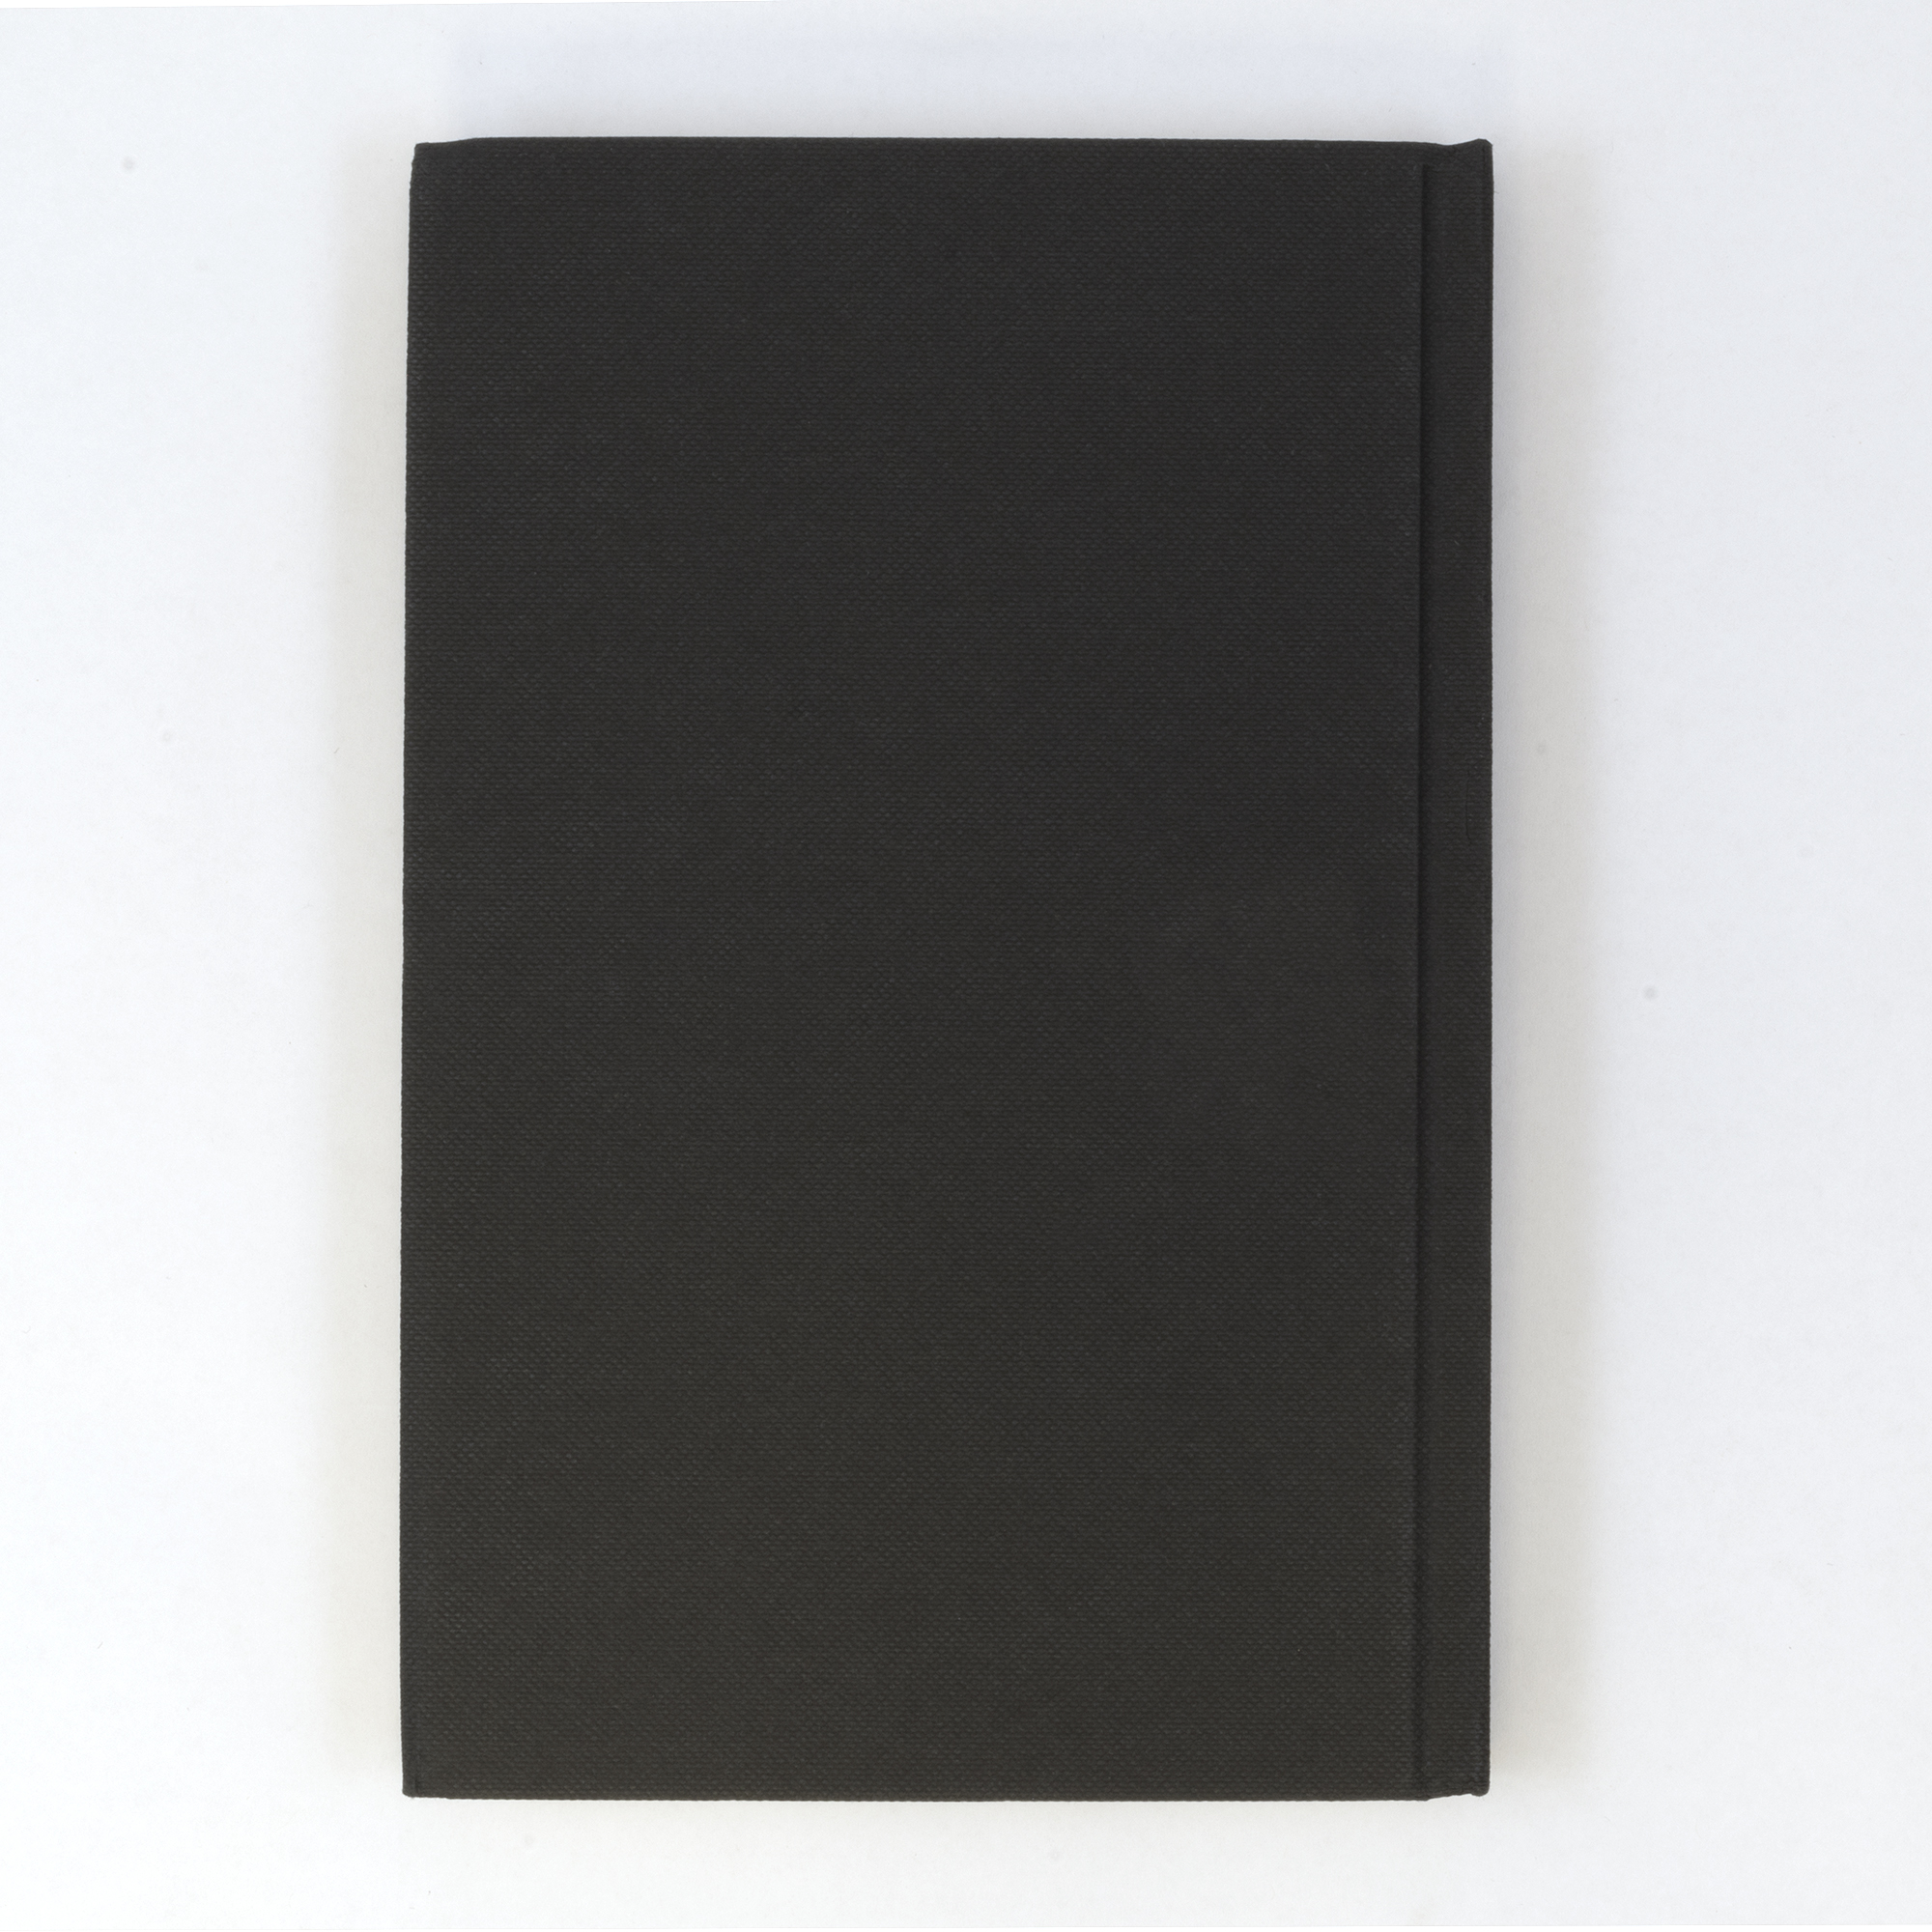 Daler-Rowney Simply Sketchbook, Black Cover, Sketch Paper, 4" x 6", 110 Sheets for Students & Artists - image 4 of 7